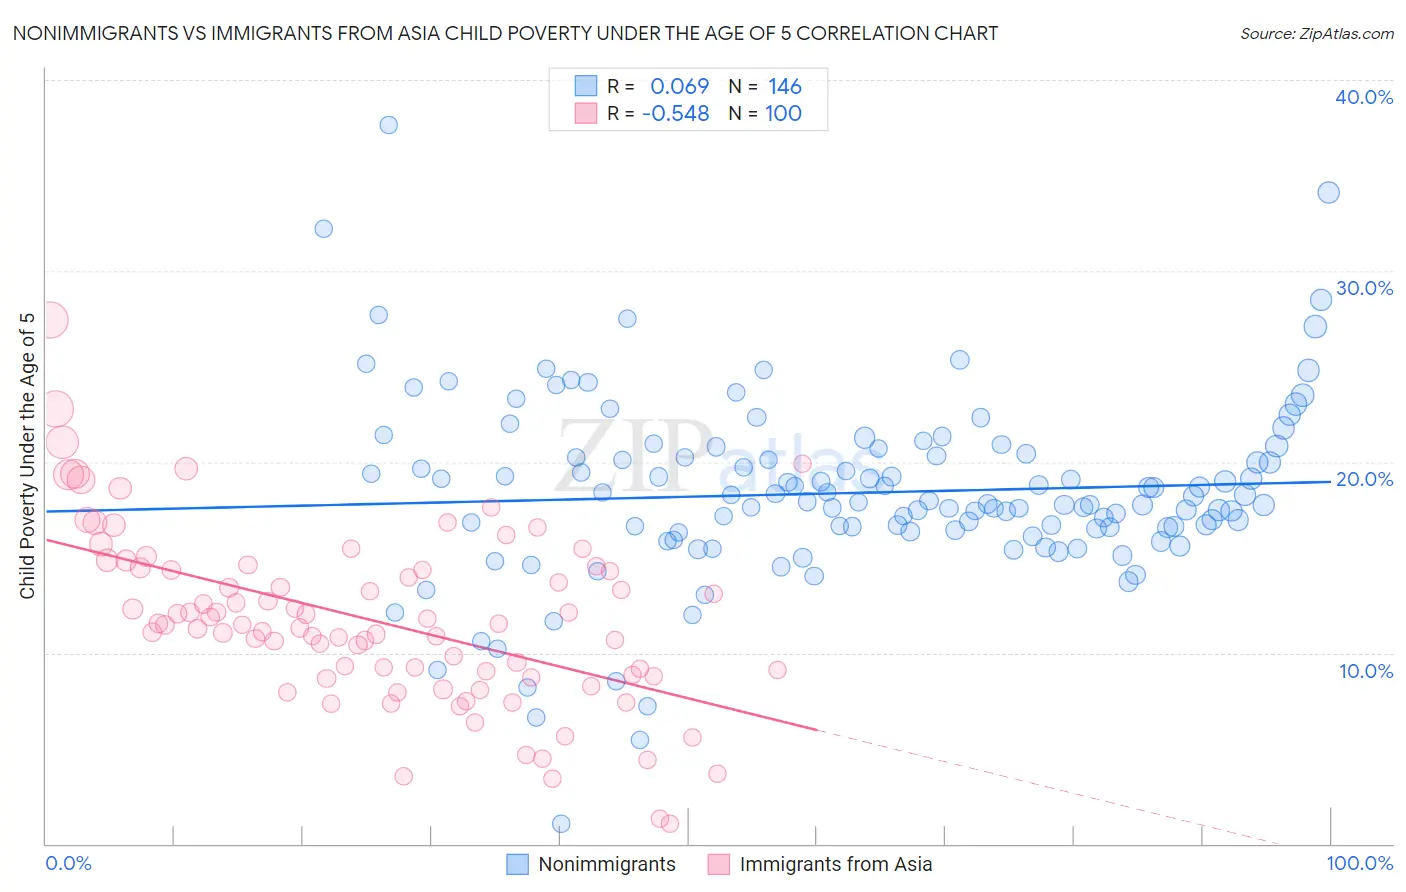 Nonimmigrants vs Immigrants from Asia Child Poverty Under the Age of 5